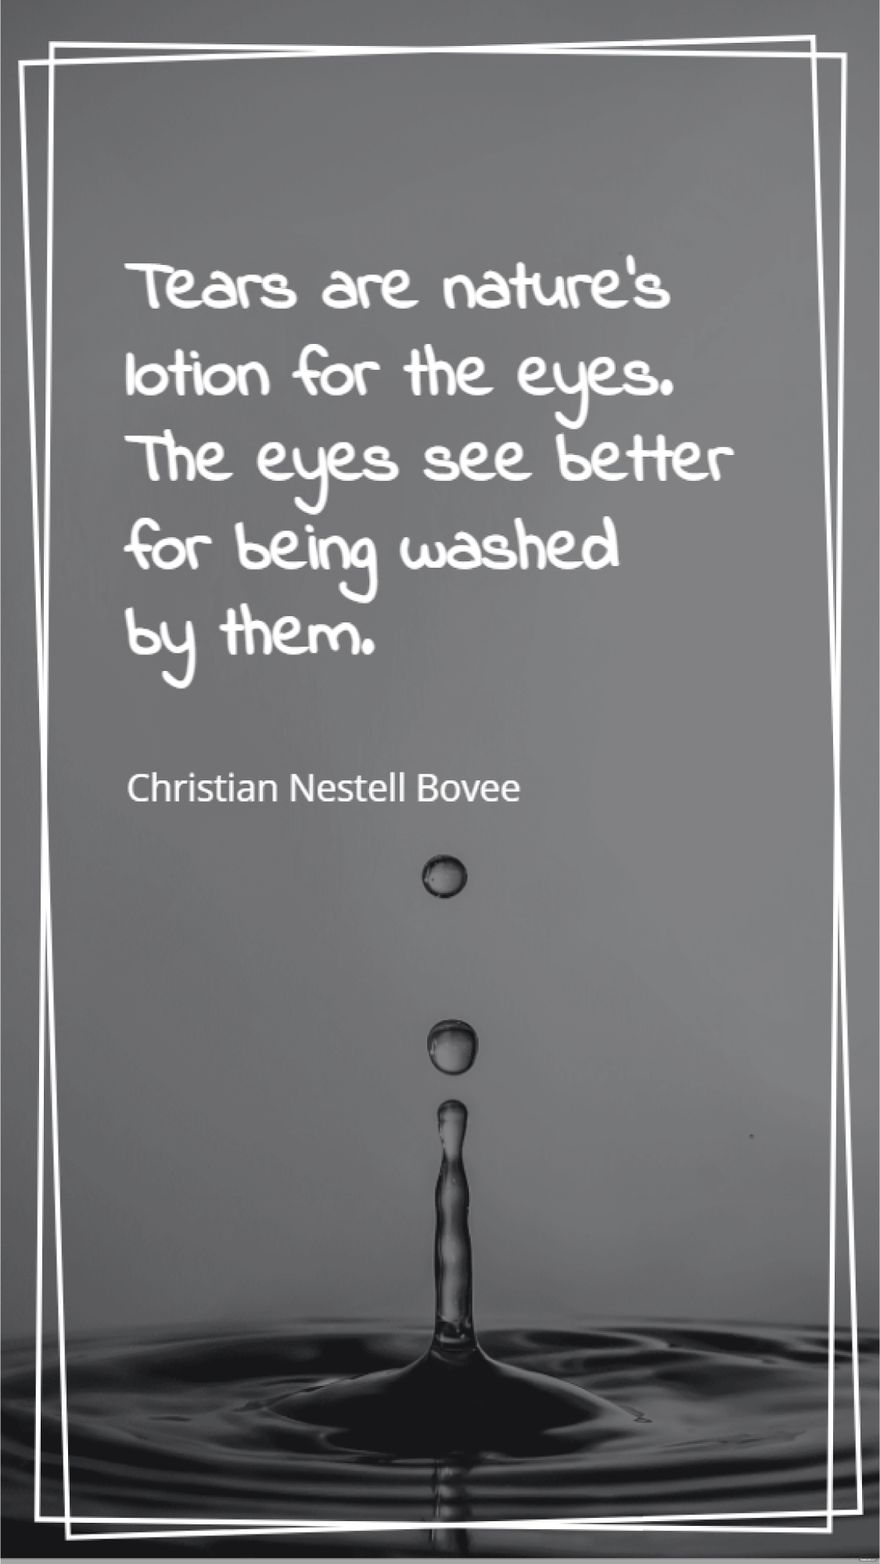 Christian Nestell Bovee - Tears are nature's lotion for the eyes. The eyes see better for being washed by them.